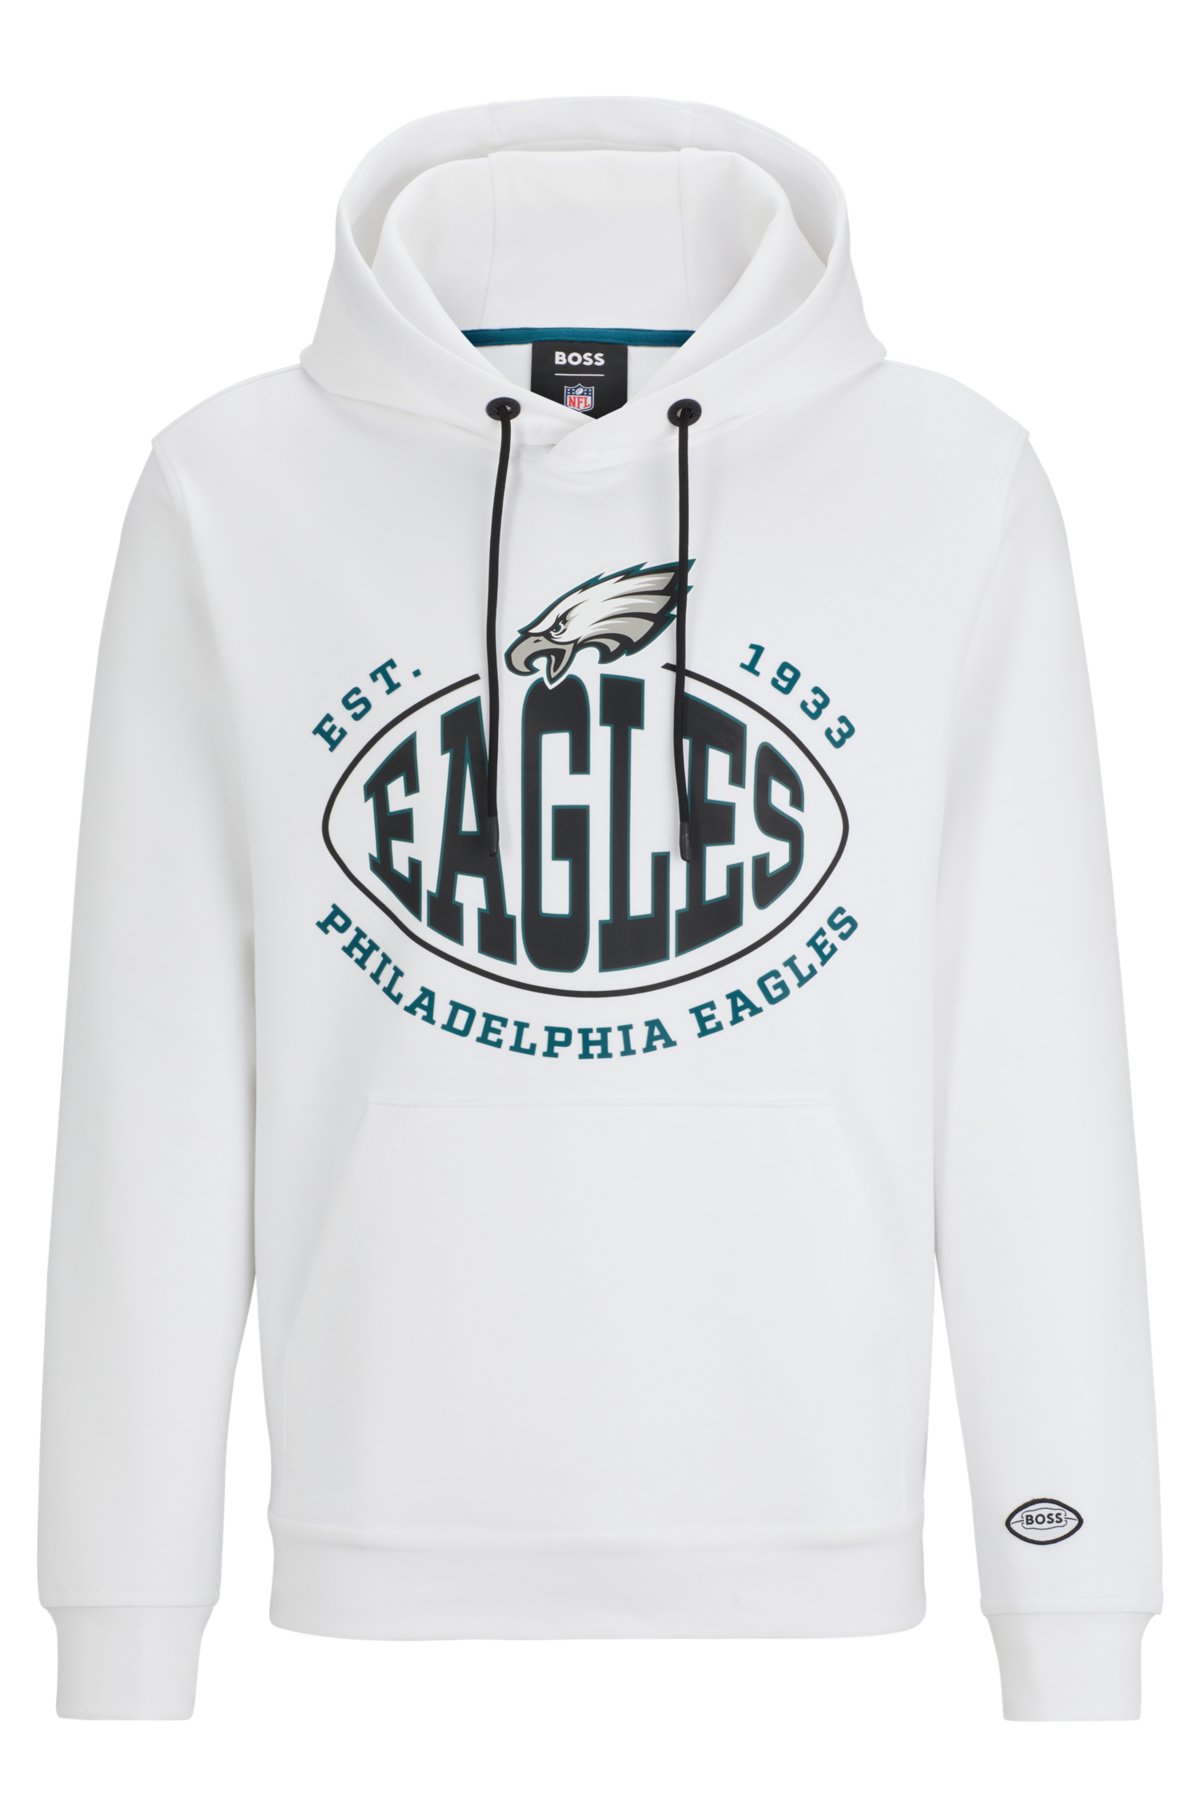 Boss x NFL Cotton-Blend Hoodie with Collaborative branding- Eagles | Men's Tracksuits Size S